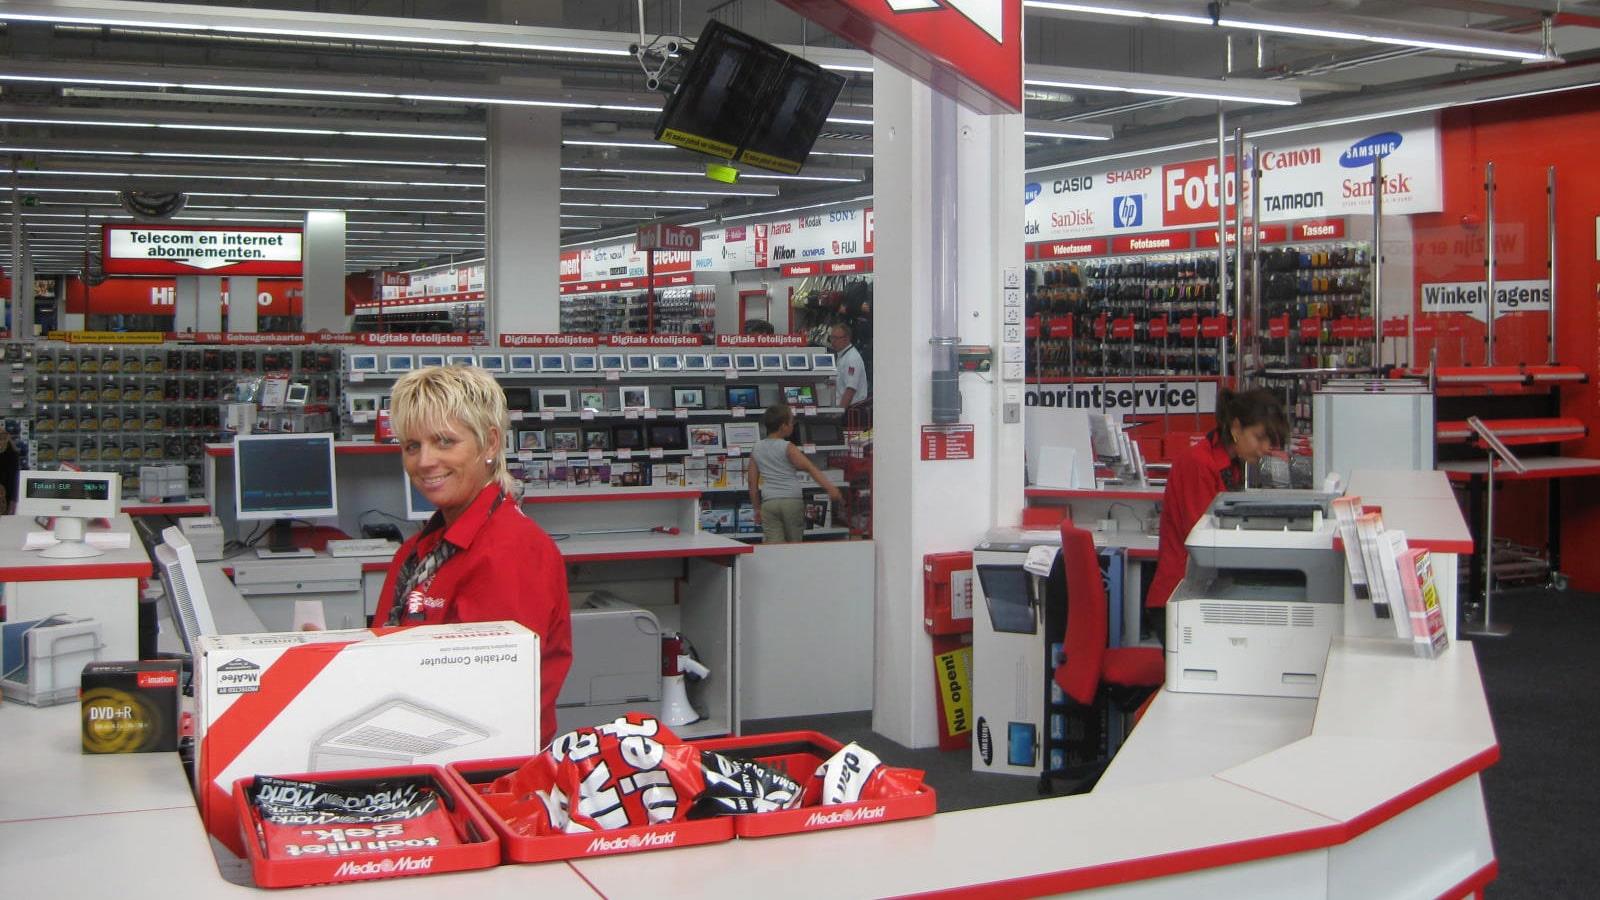 Media Markt increased recycling rates by compaction